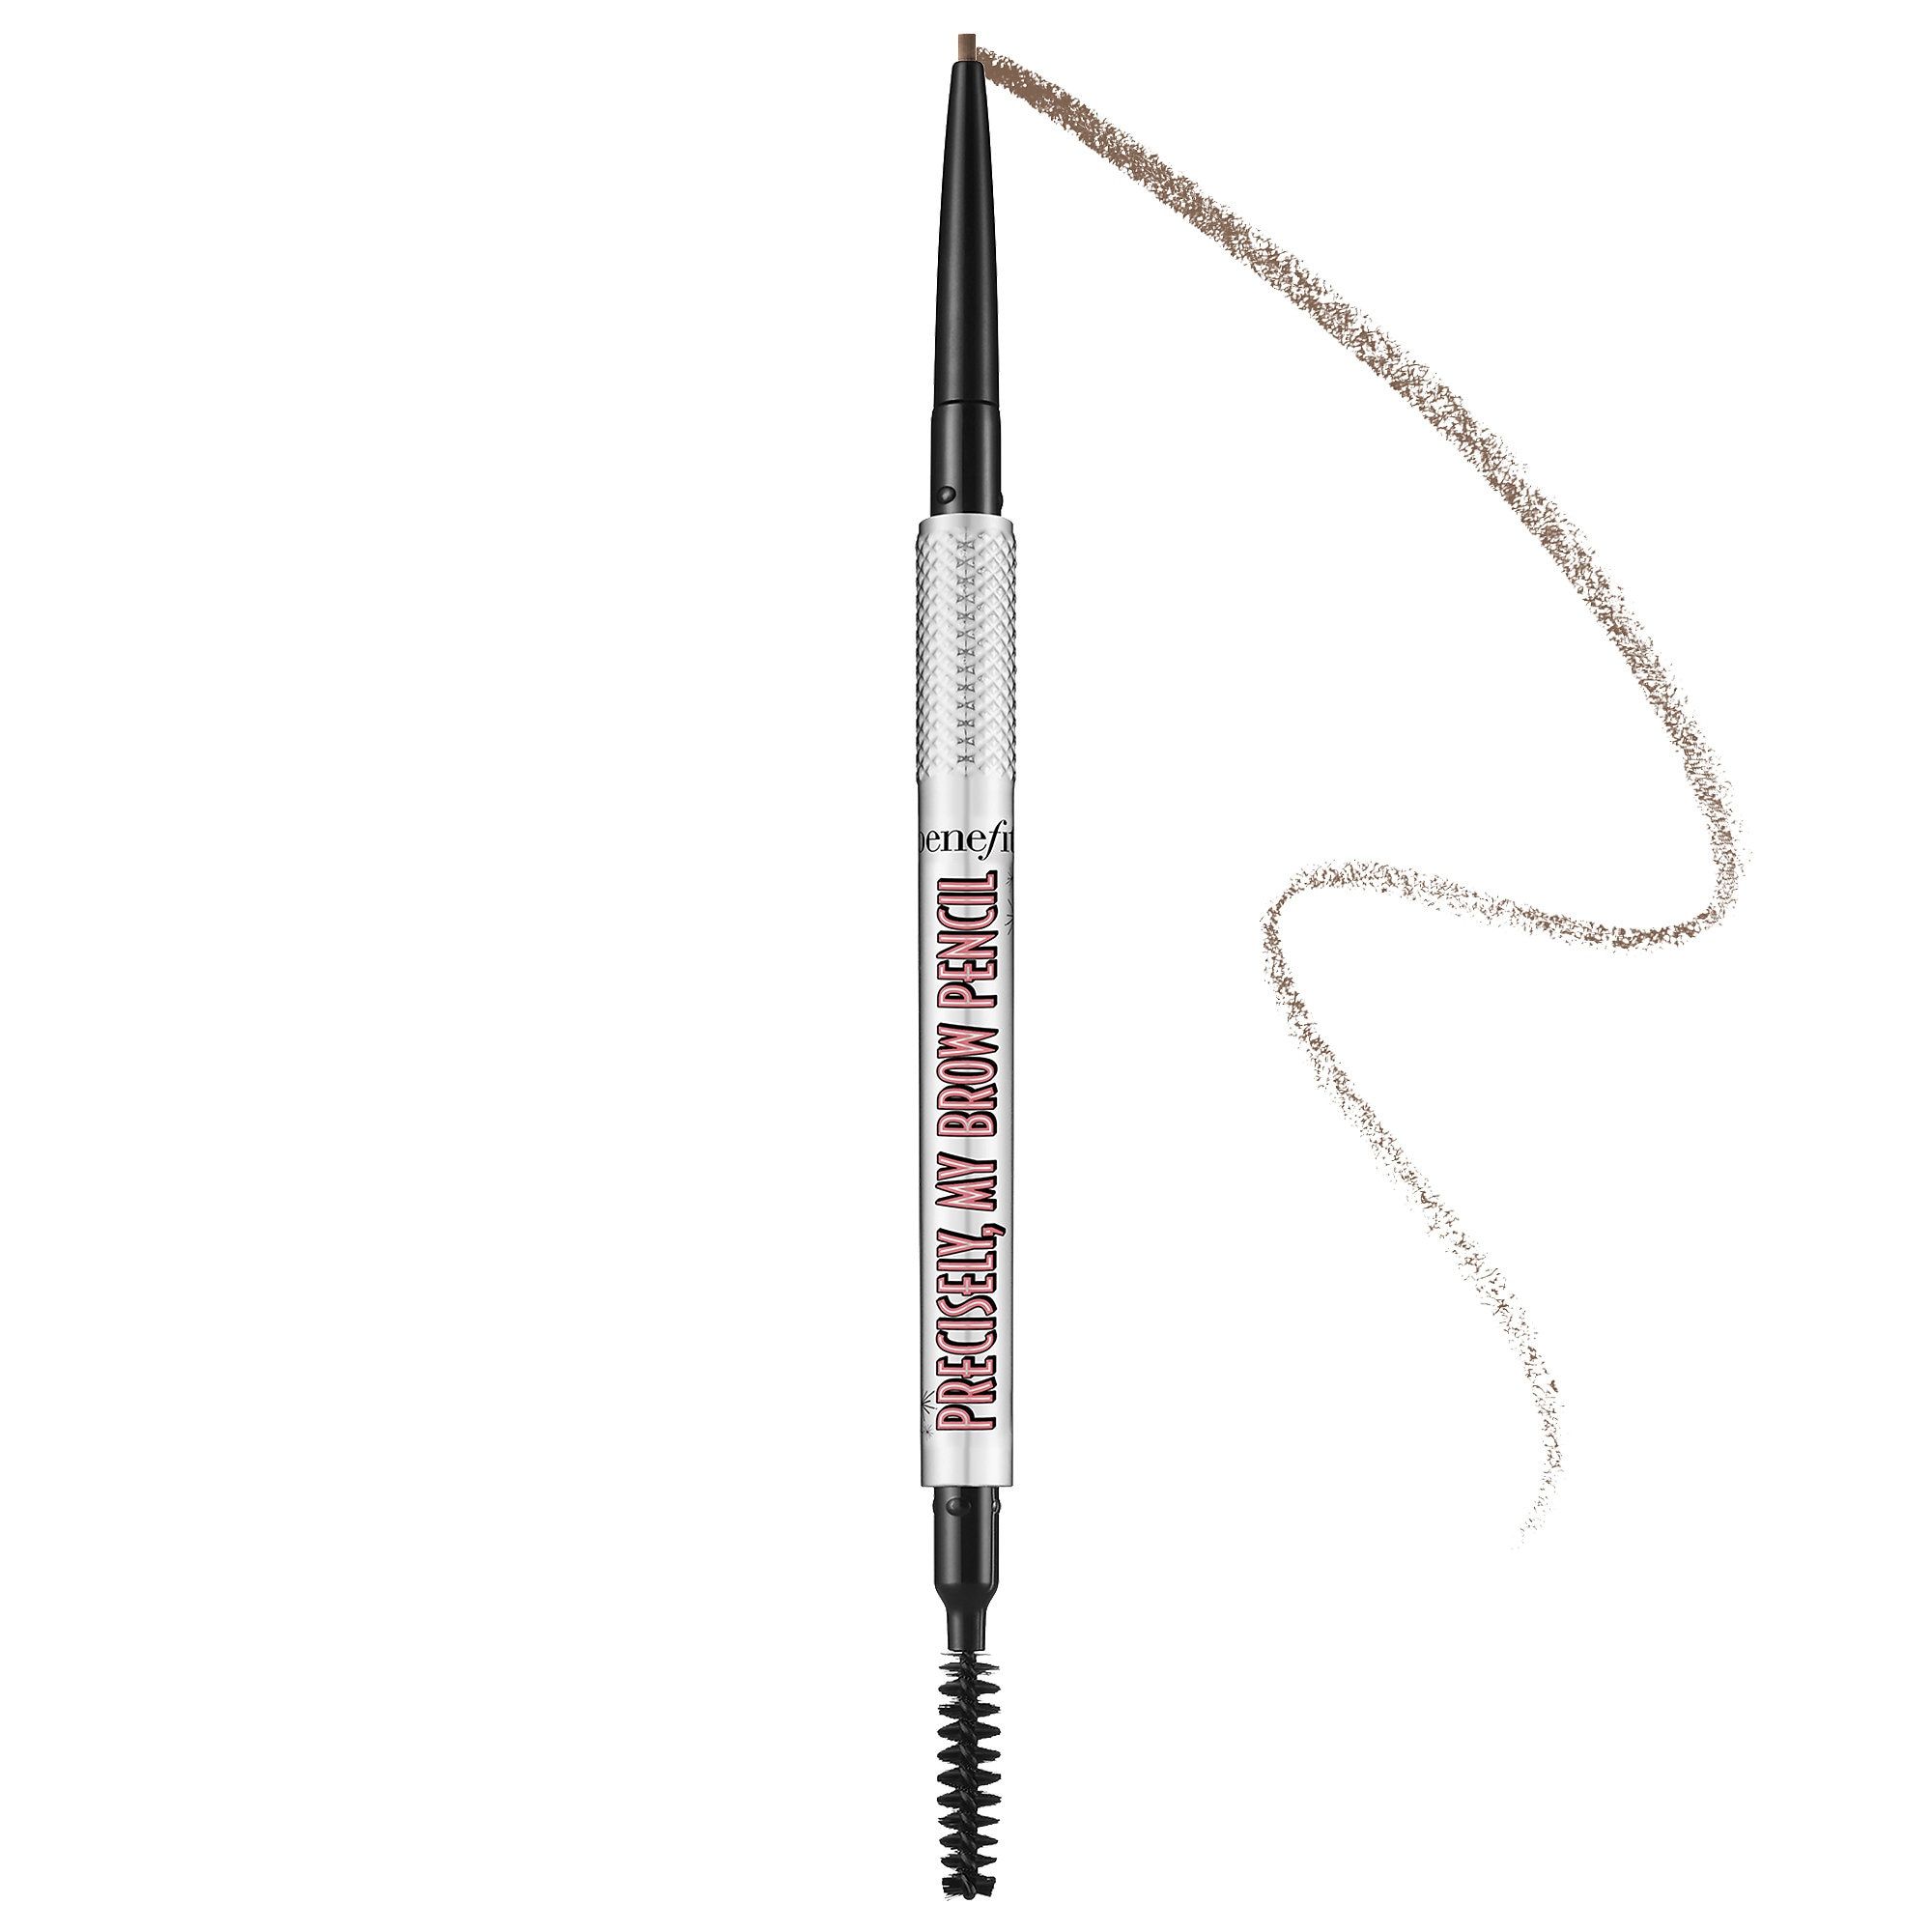 Precisely, My Brow Pencil